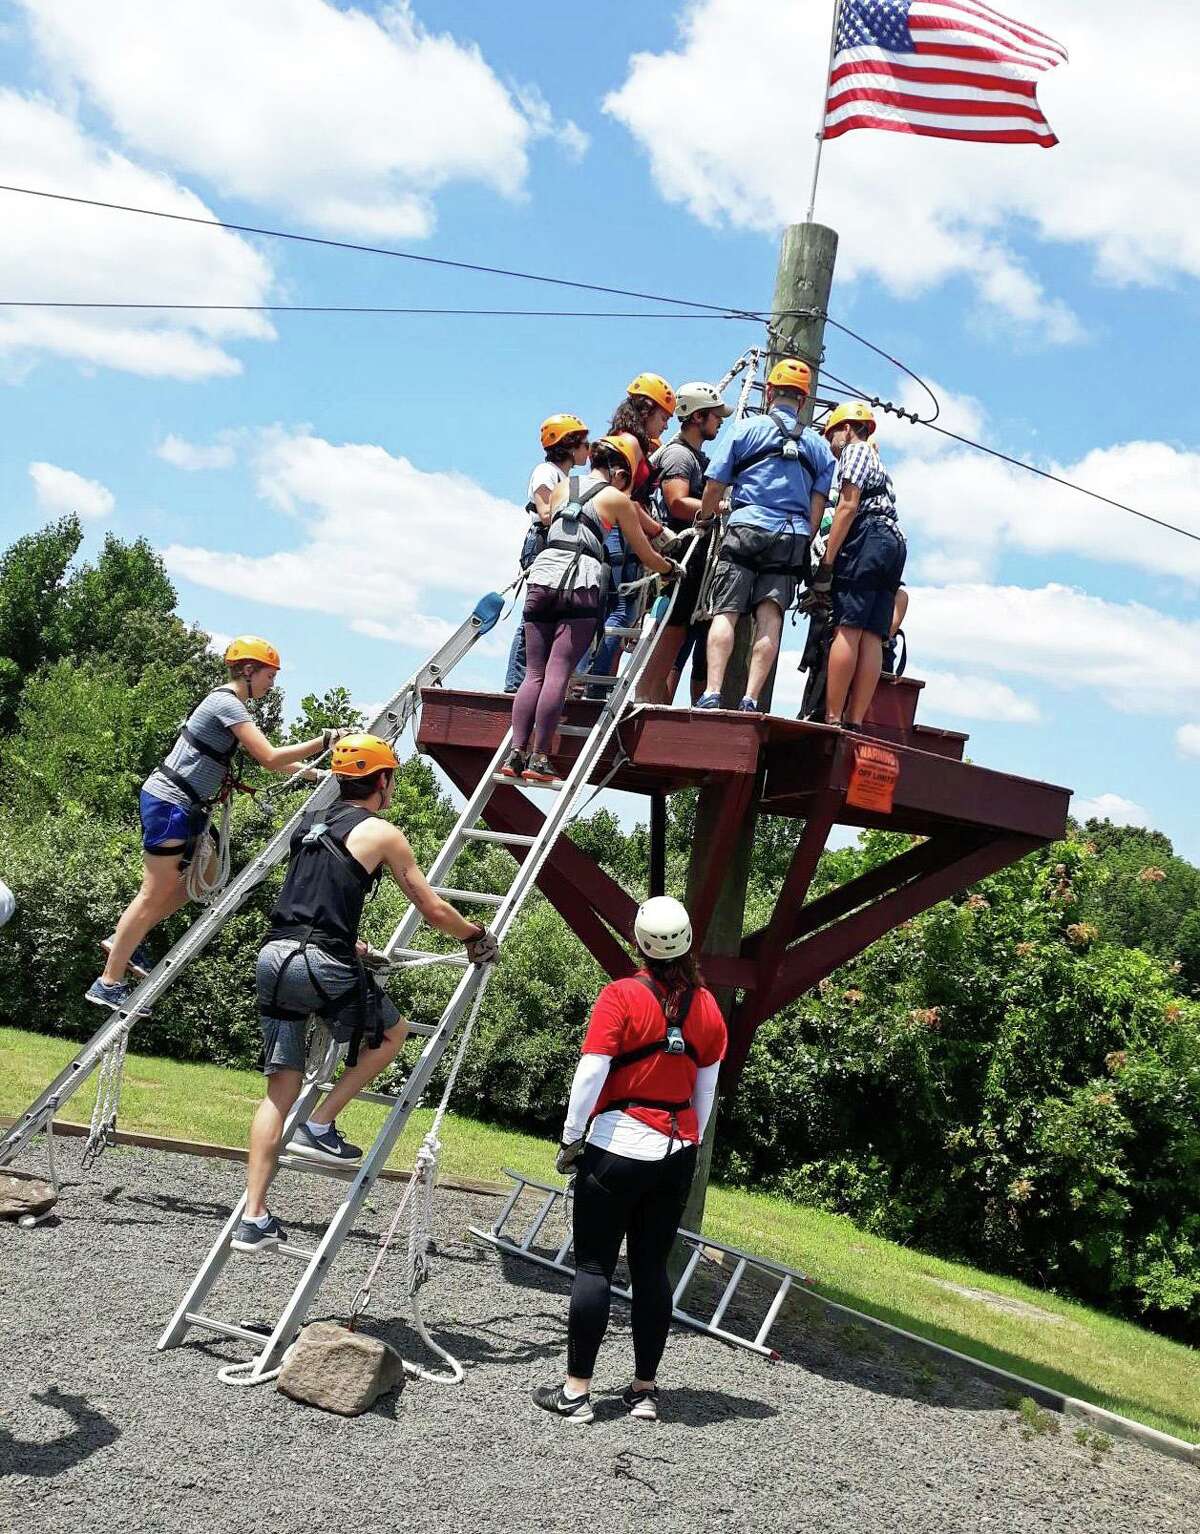 Eleven adults and young people participants visited Empower Leadership Sports and Adventure Center in Middletown July 13 for a warm weather session of zip lining as part of a Nutmeg Big Brothers Big Sisters’ program.